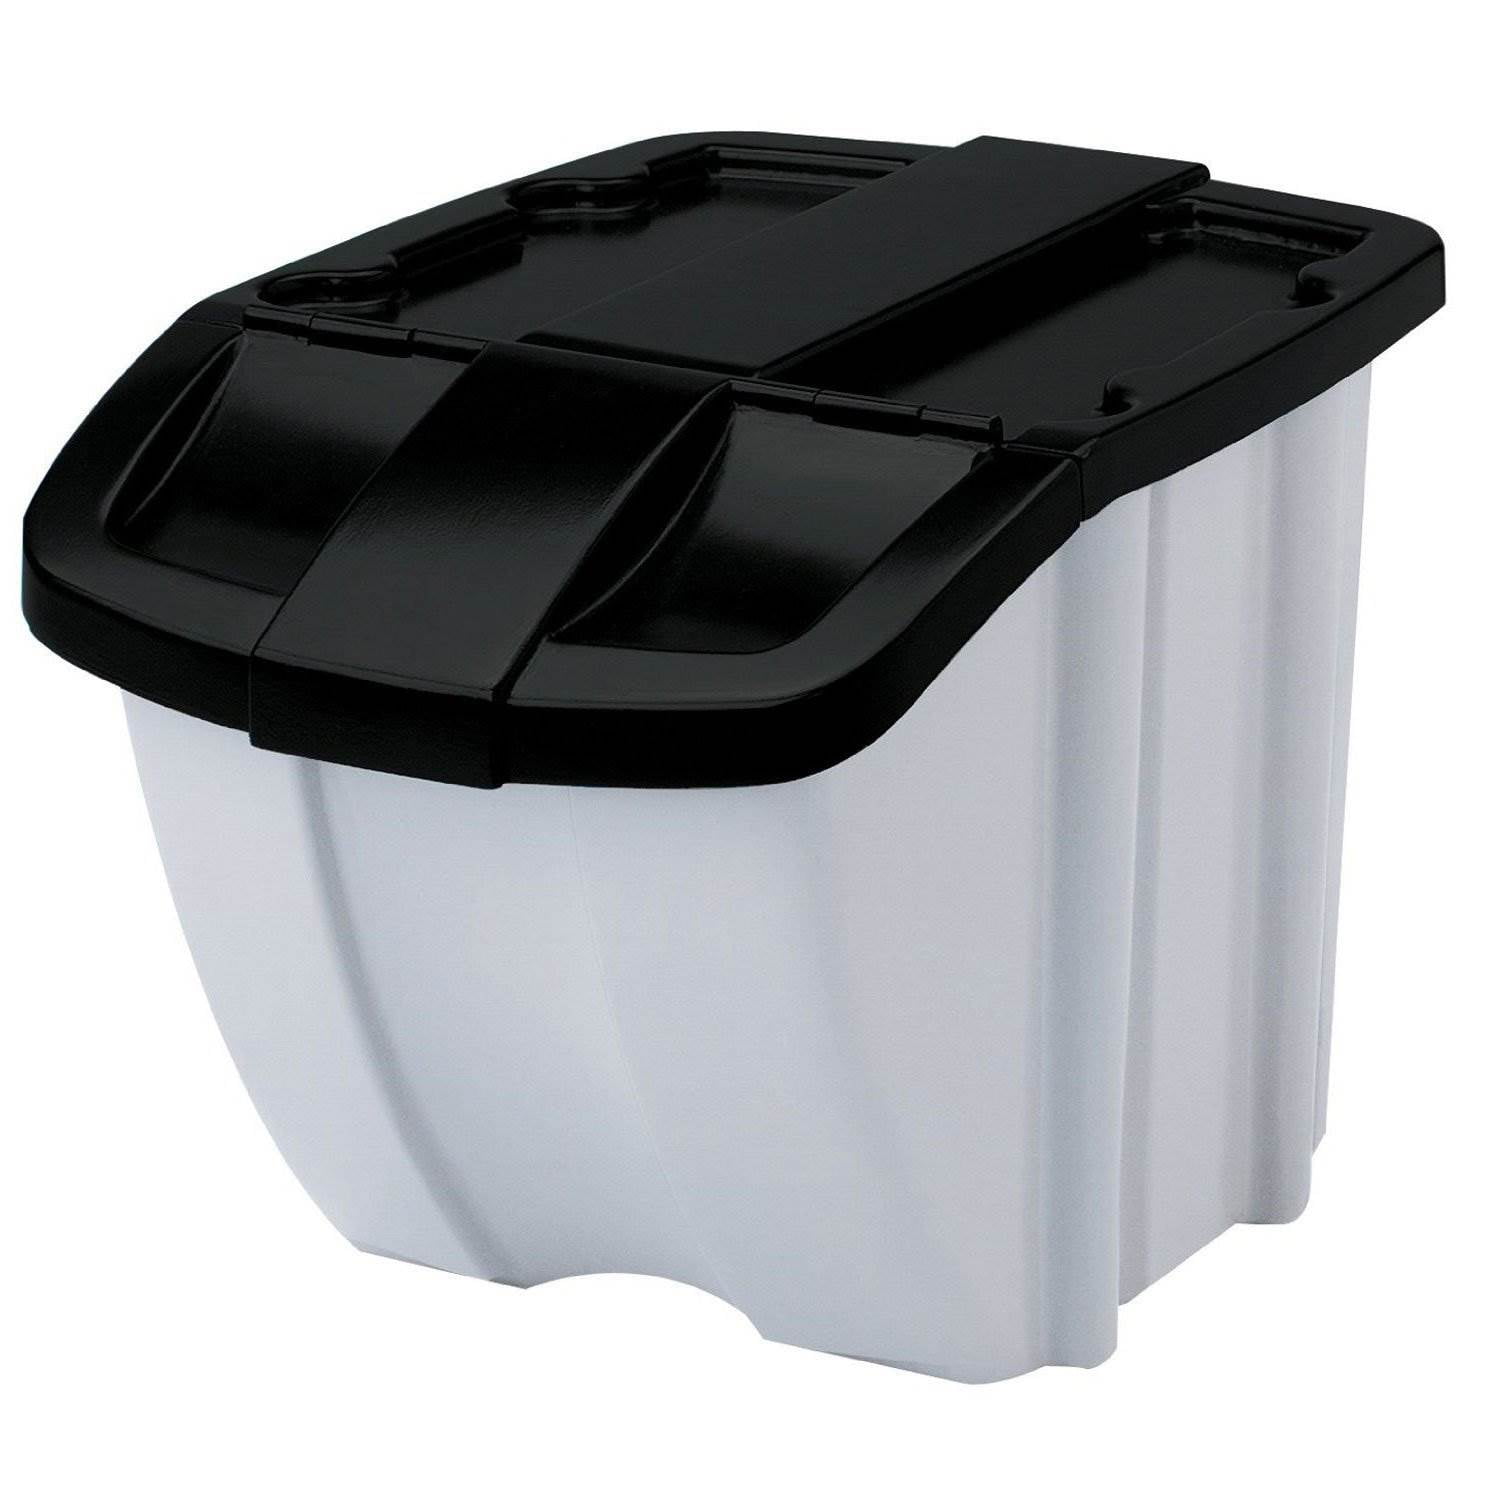 Recycling Bin Plastic Tote Outdoor Recycled Storage 18 Gallon Container 2-Pack 